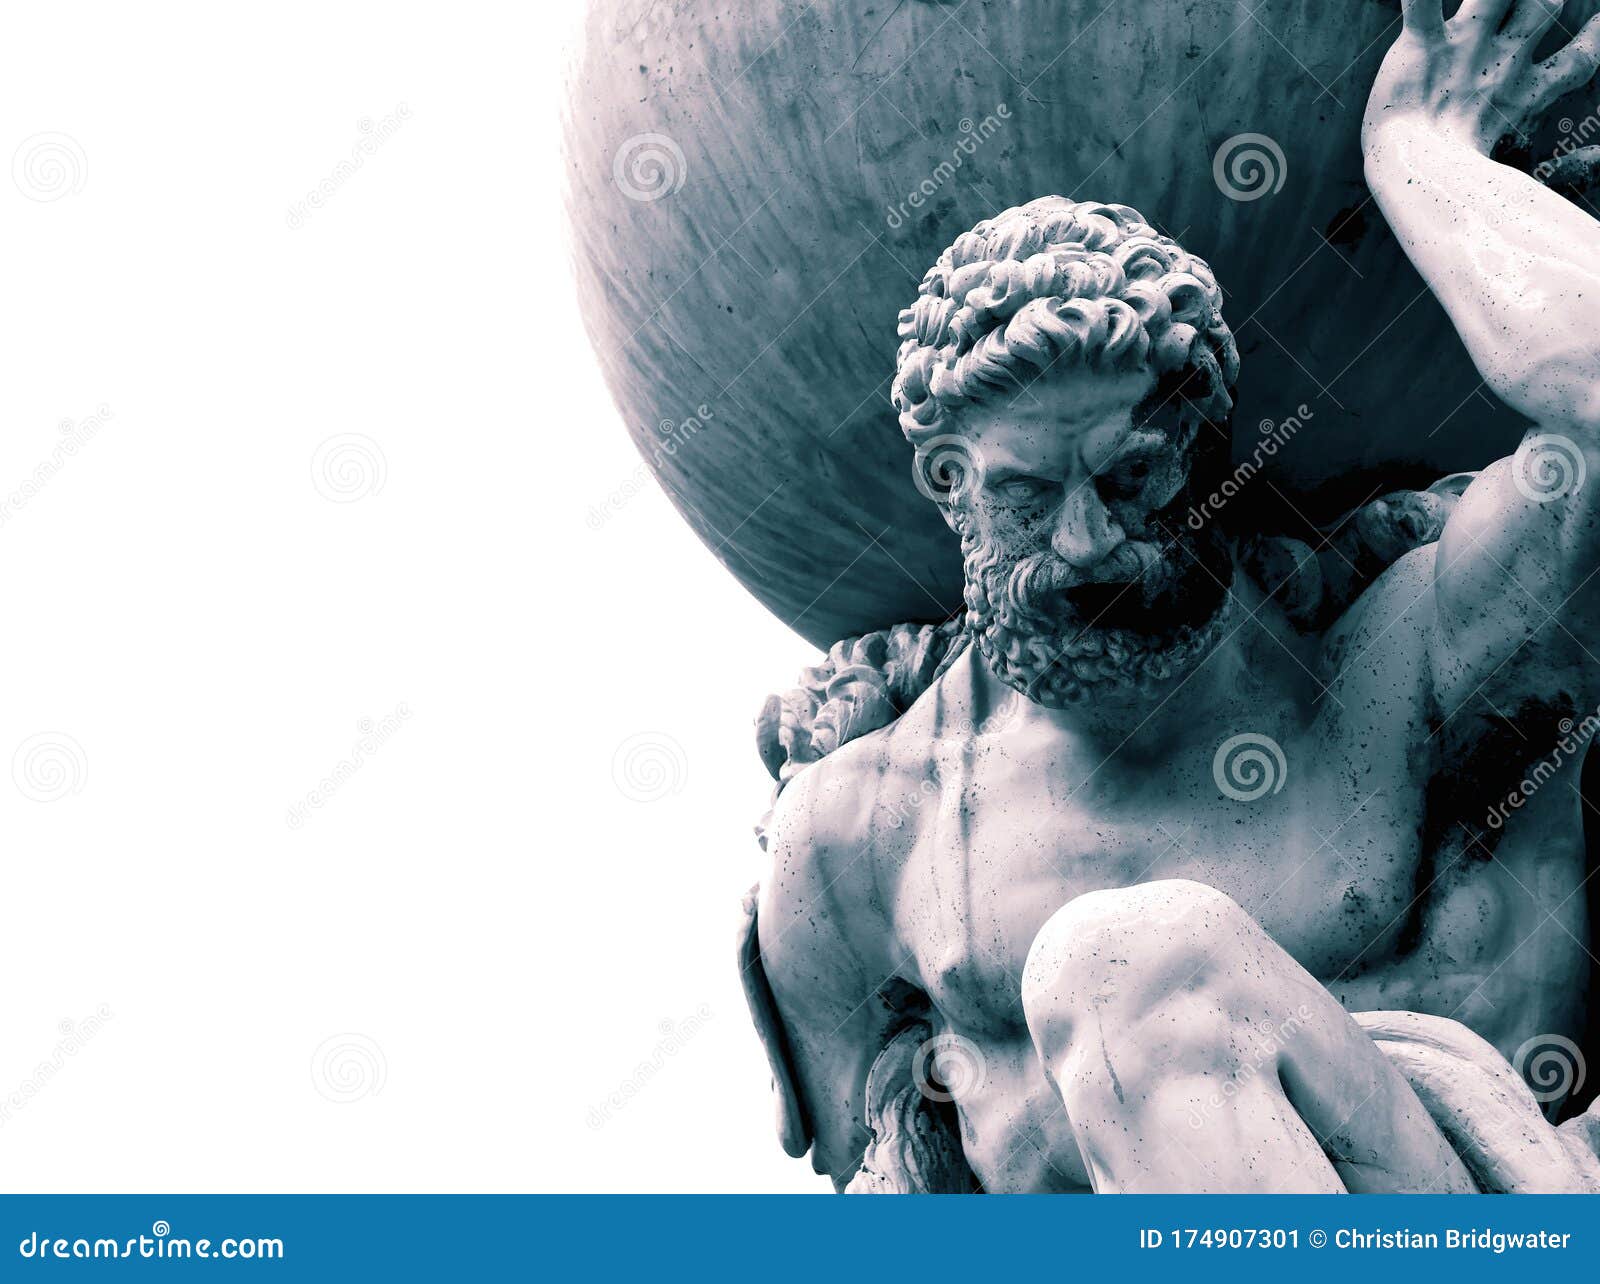 statue of the greek god atlas holding the globe on his shoulders.